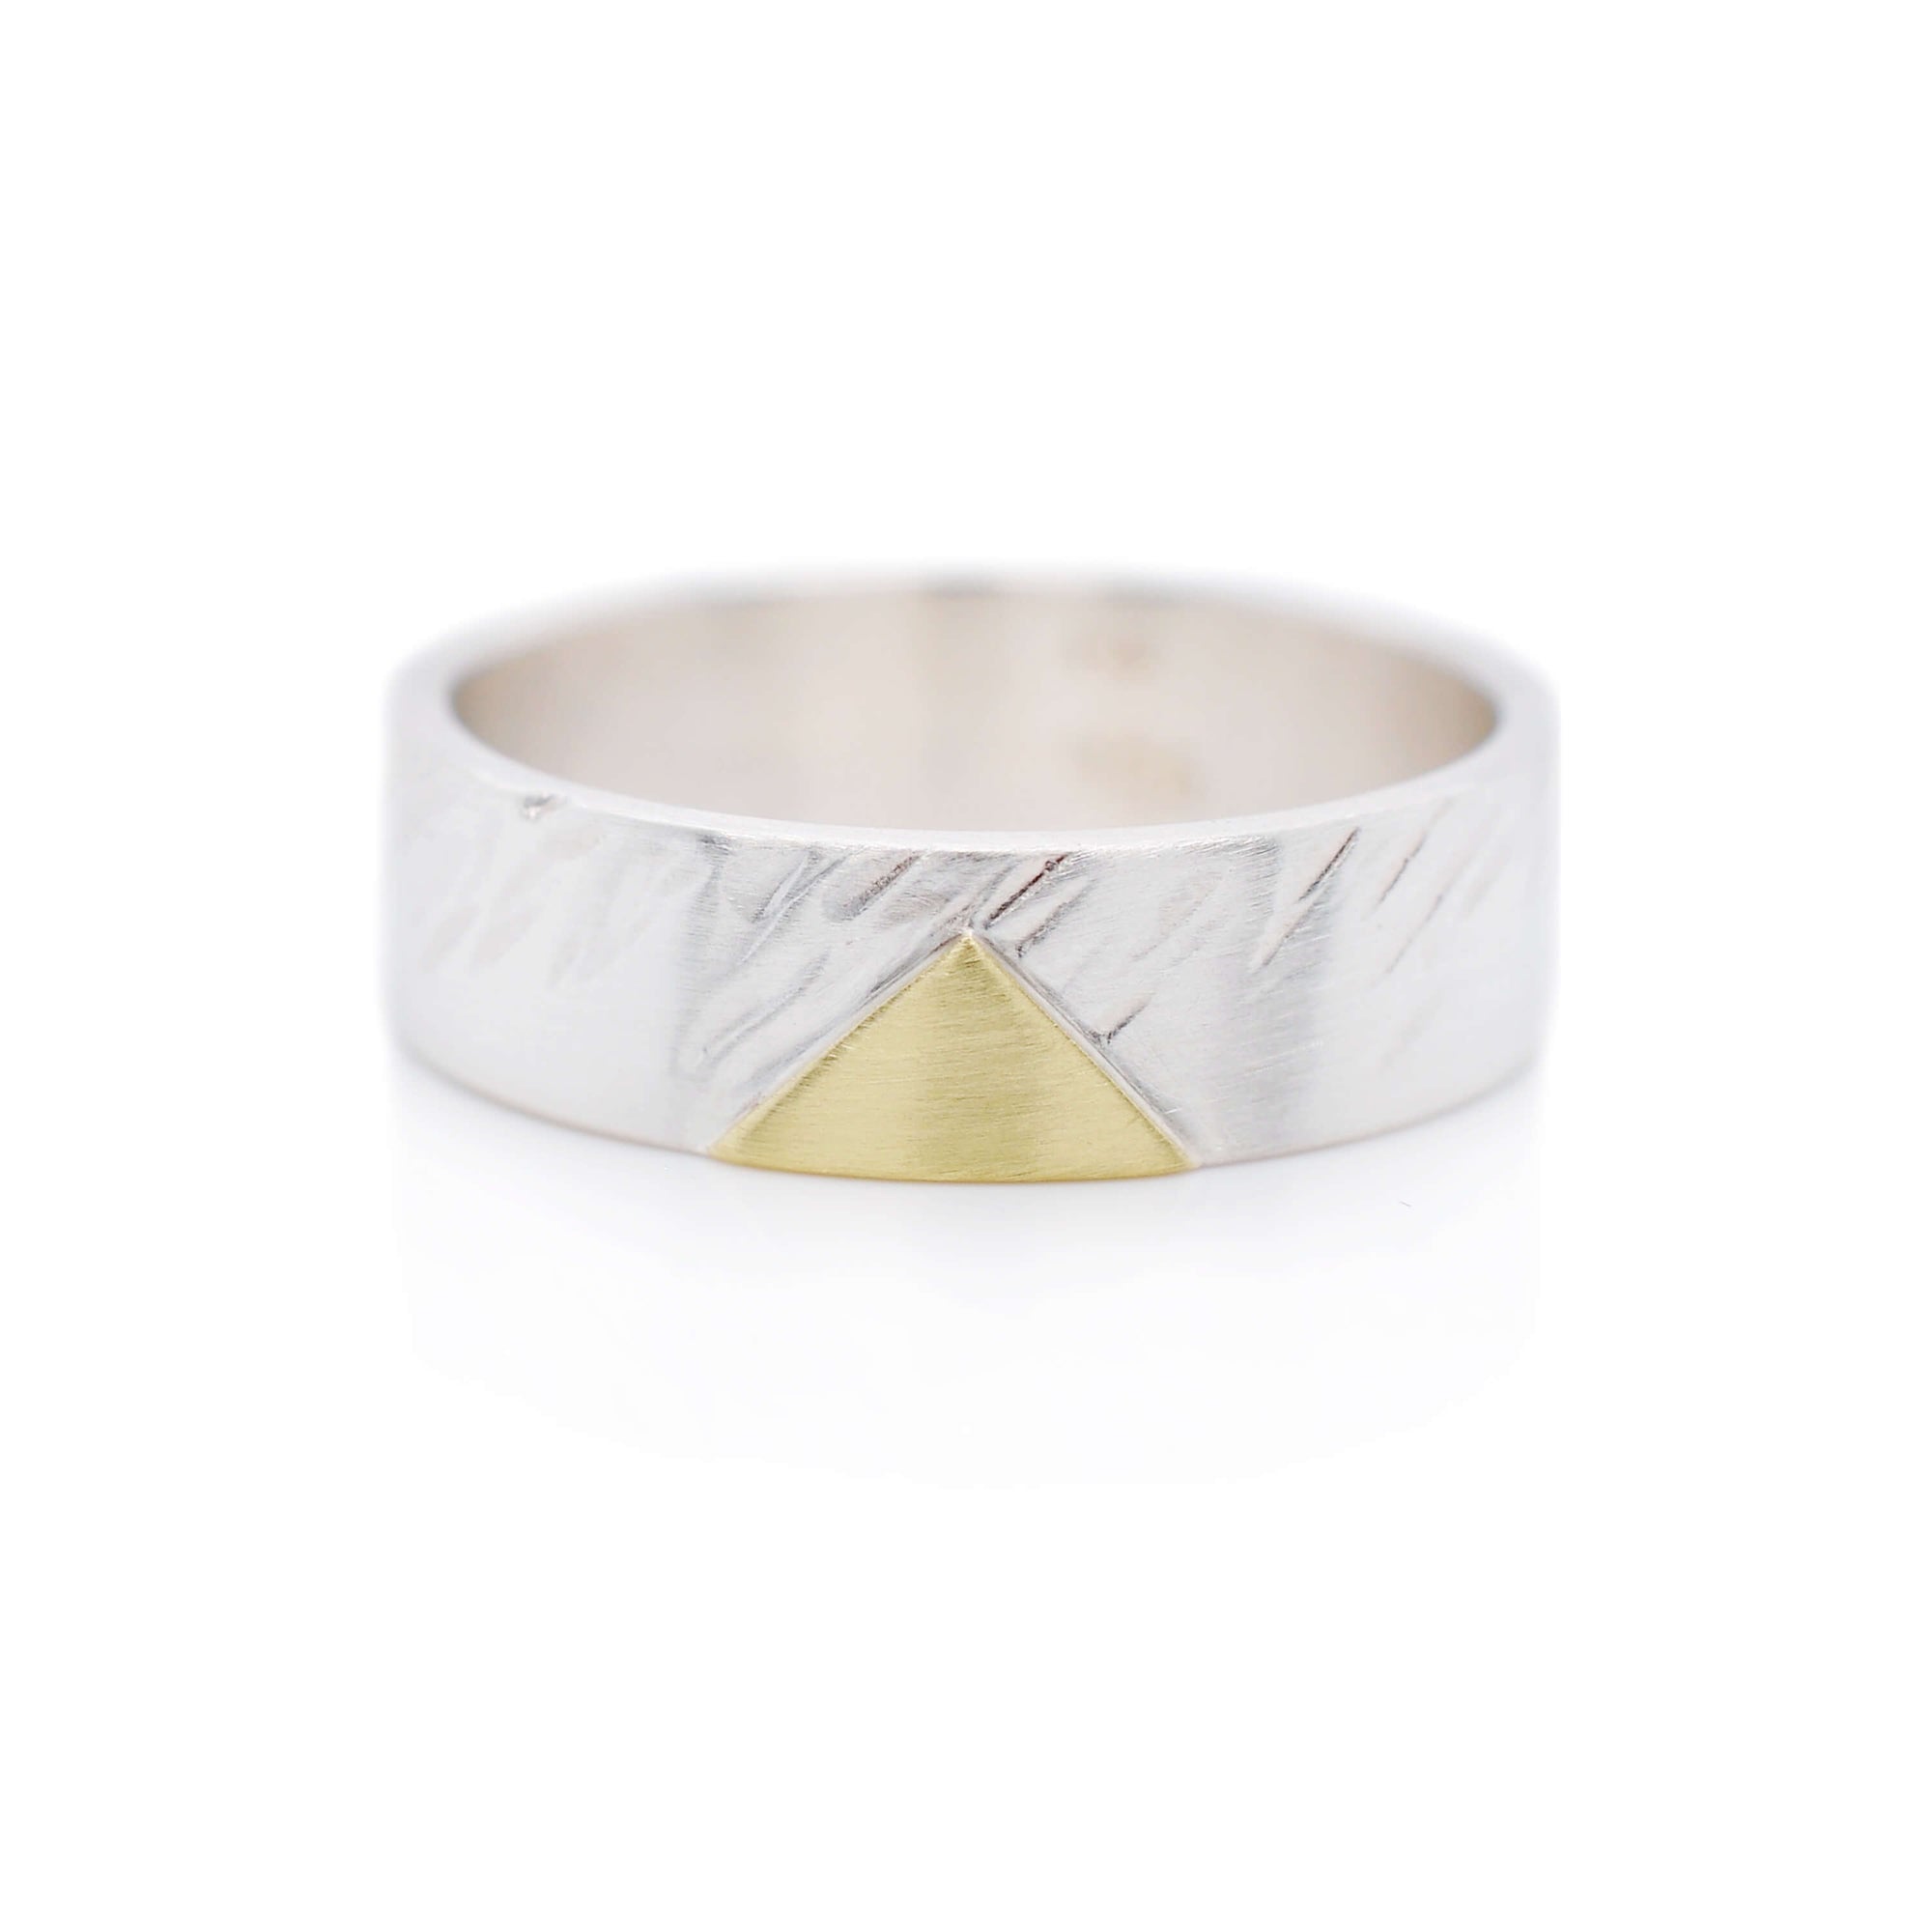 Green gold and silver pyramid band. Handmade by EC Design Jewelry in Minneapolis, MN.